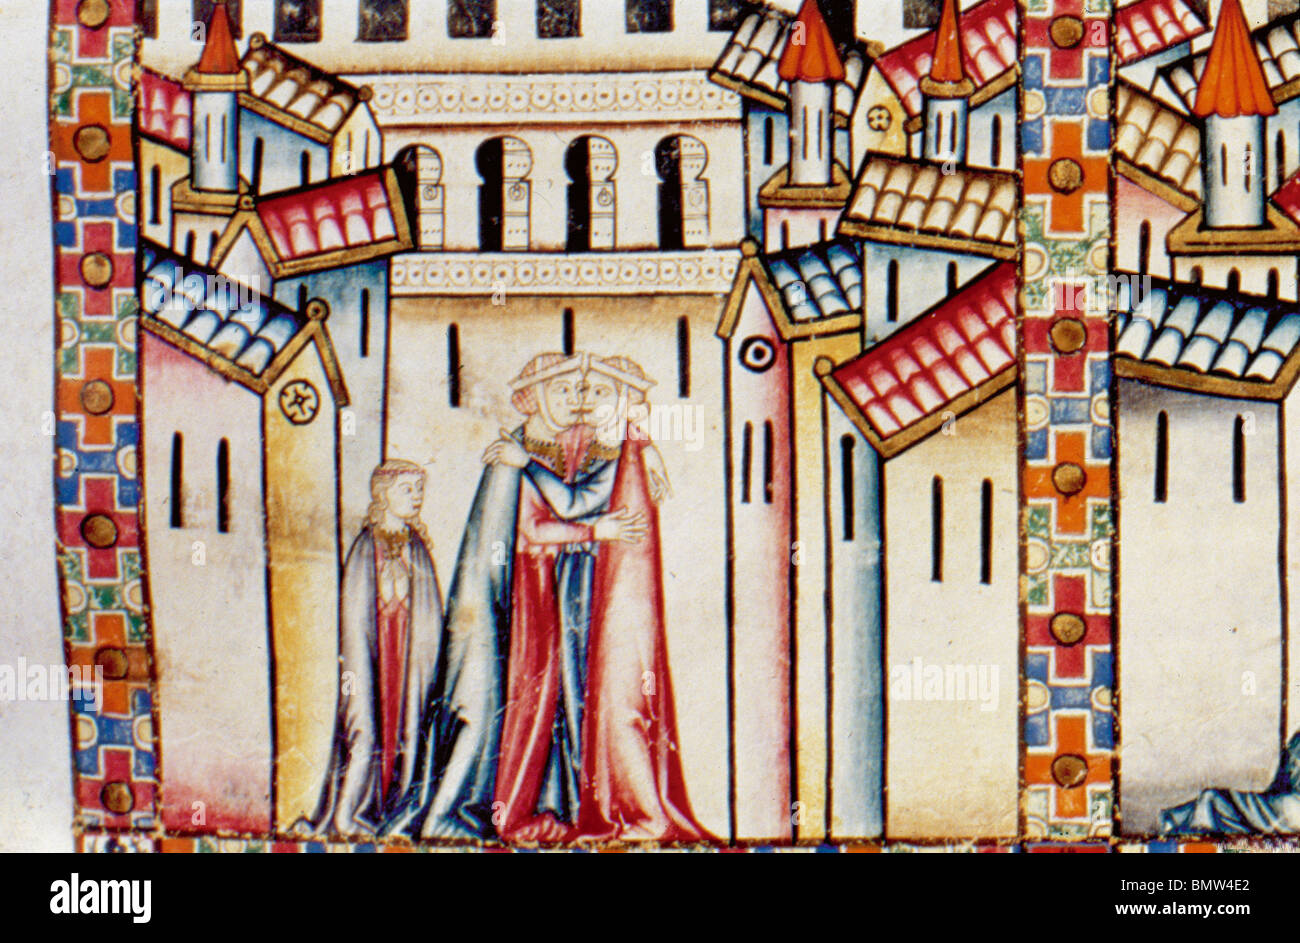 Cantigas de Santa María (Canticles of Holy Mary). Encounter between two women. Spain. National Heritage. Stock Photo